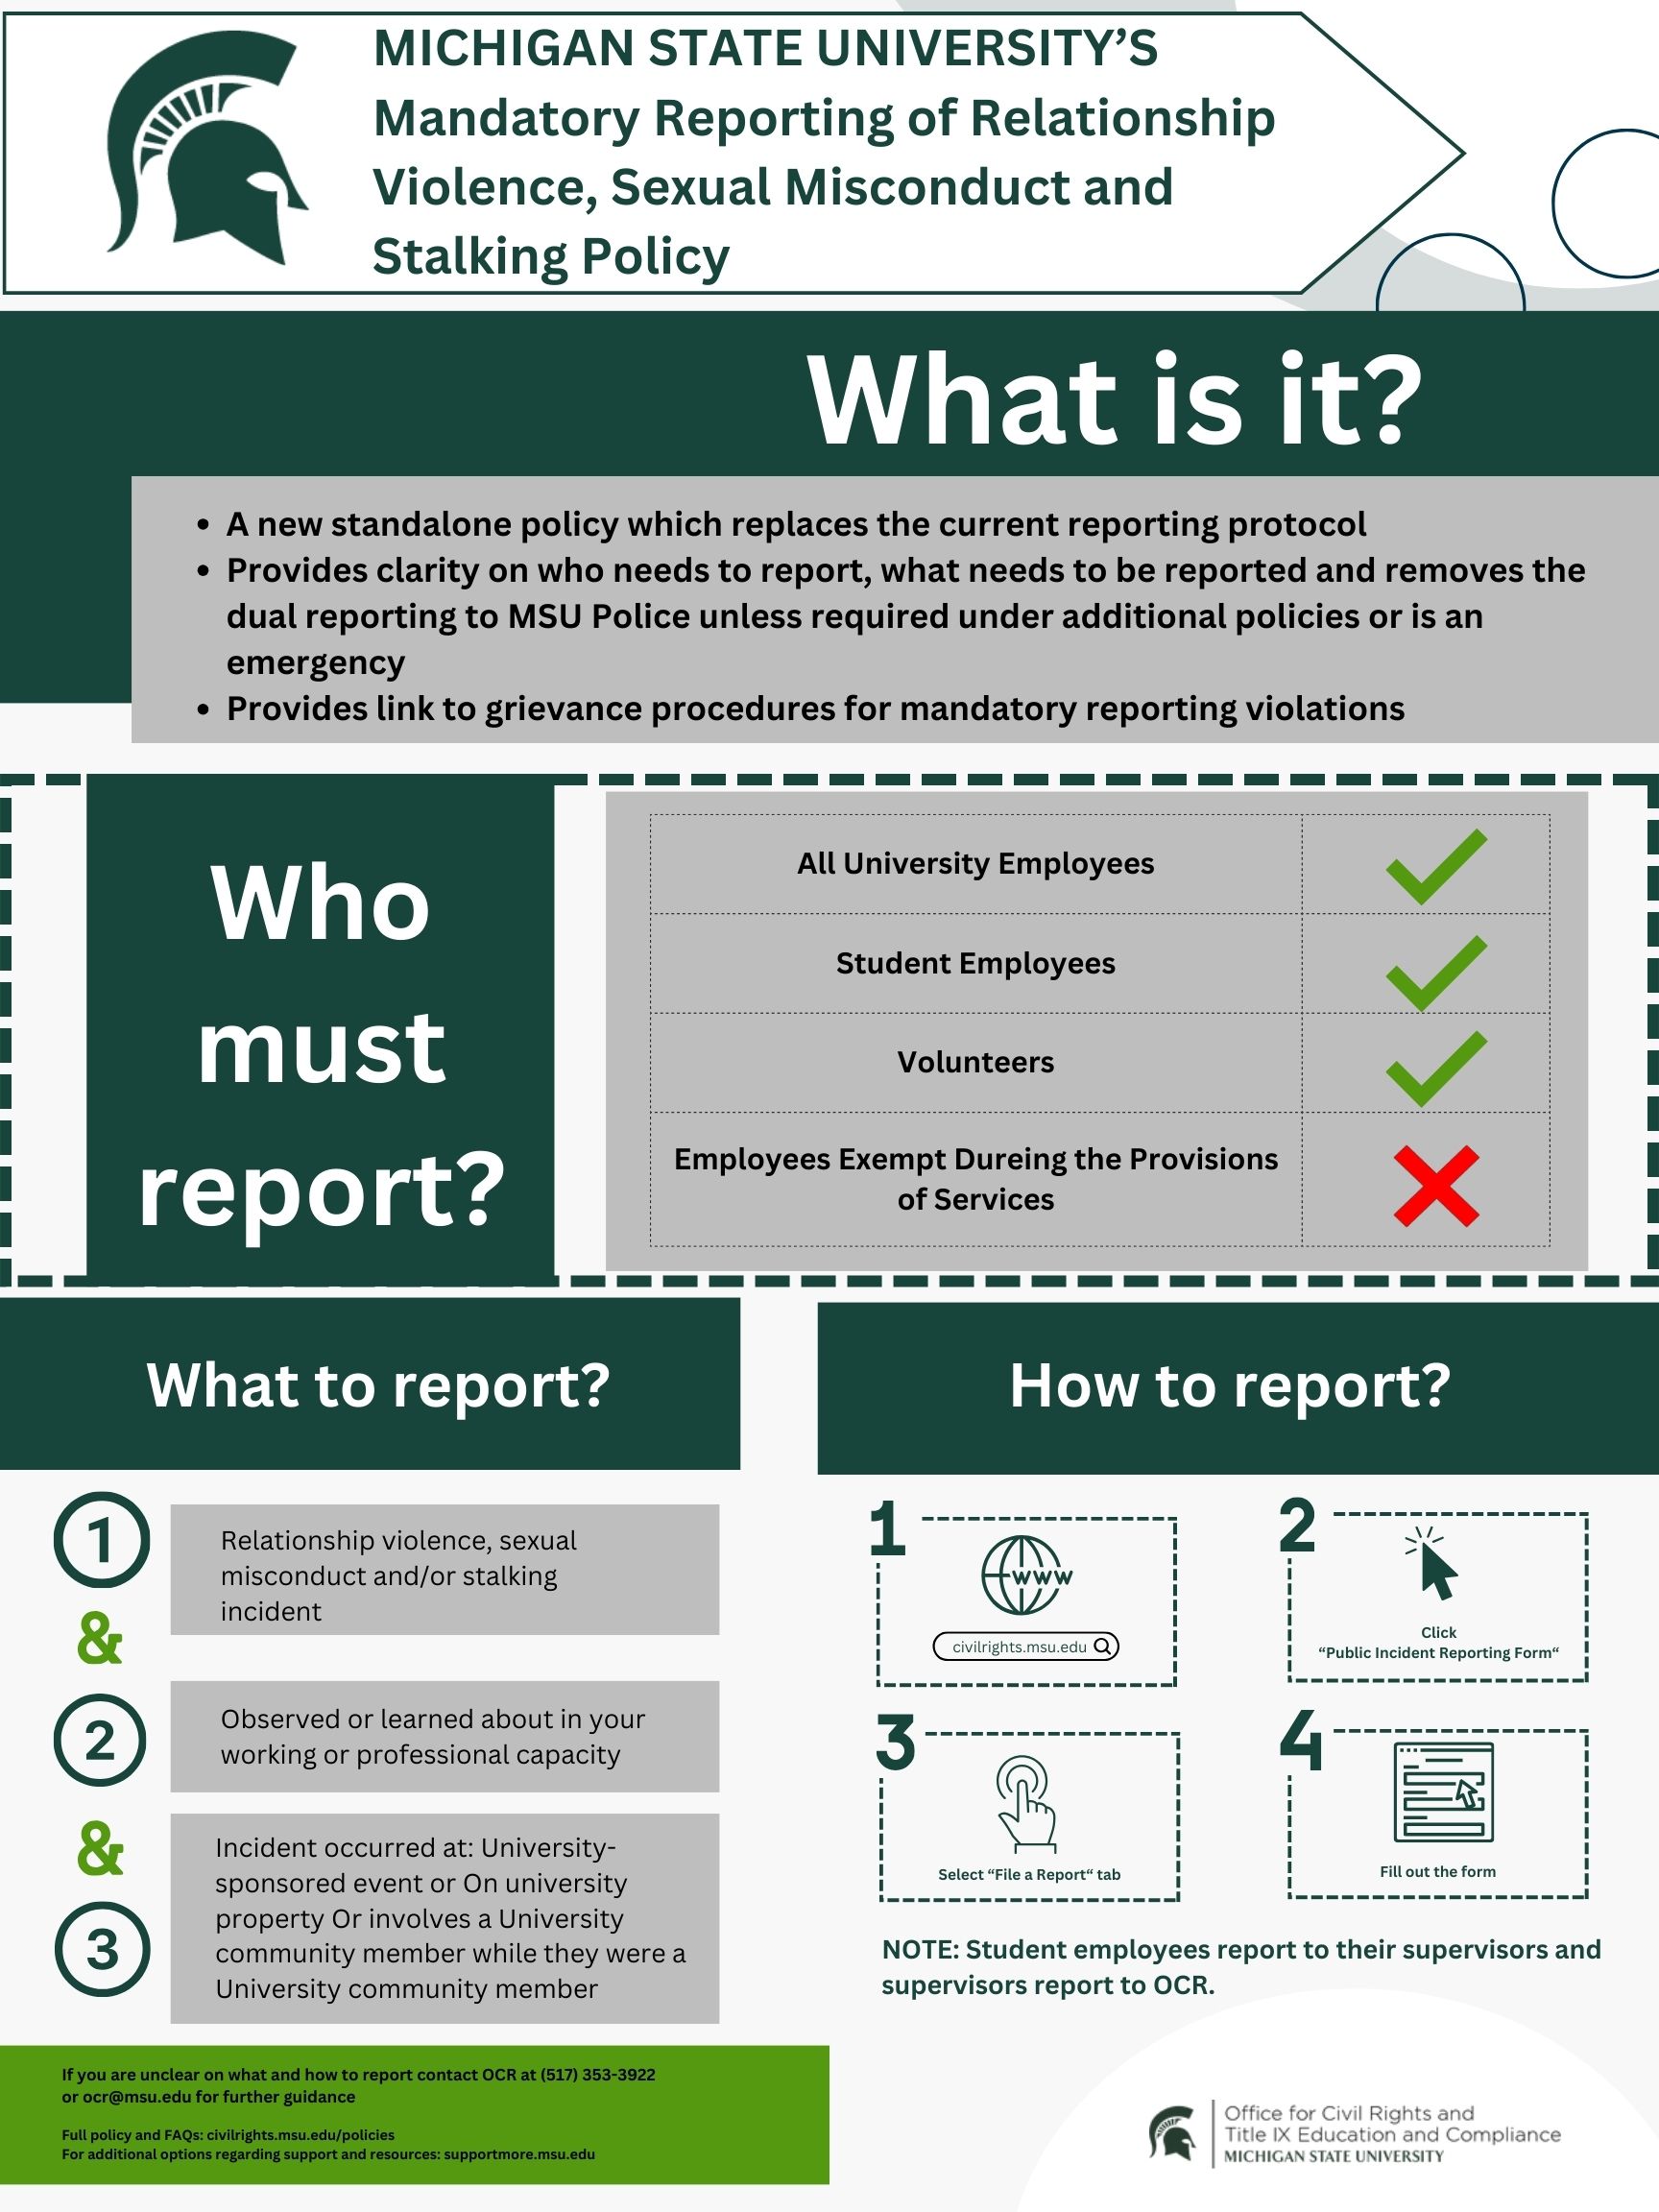 MSU RVSM Reporting infographic. Accessible version available for download.